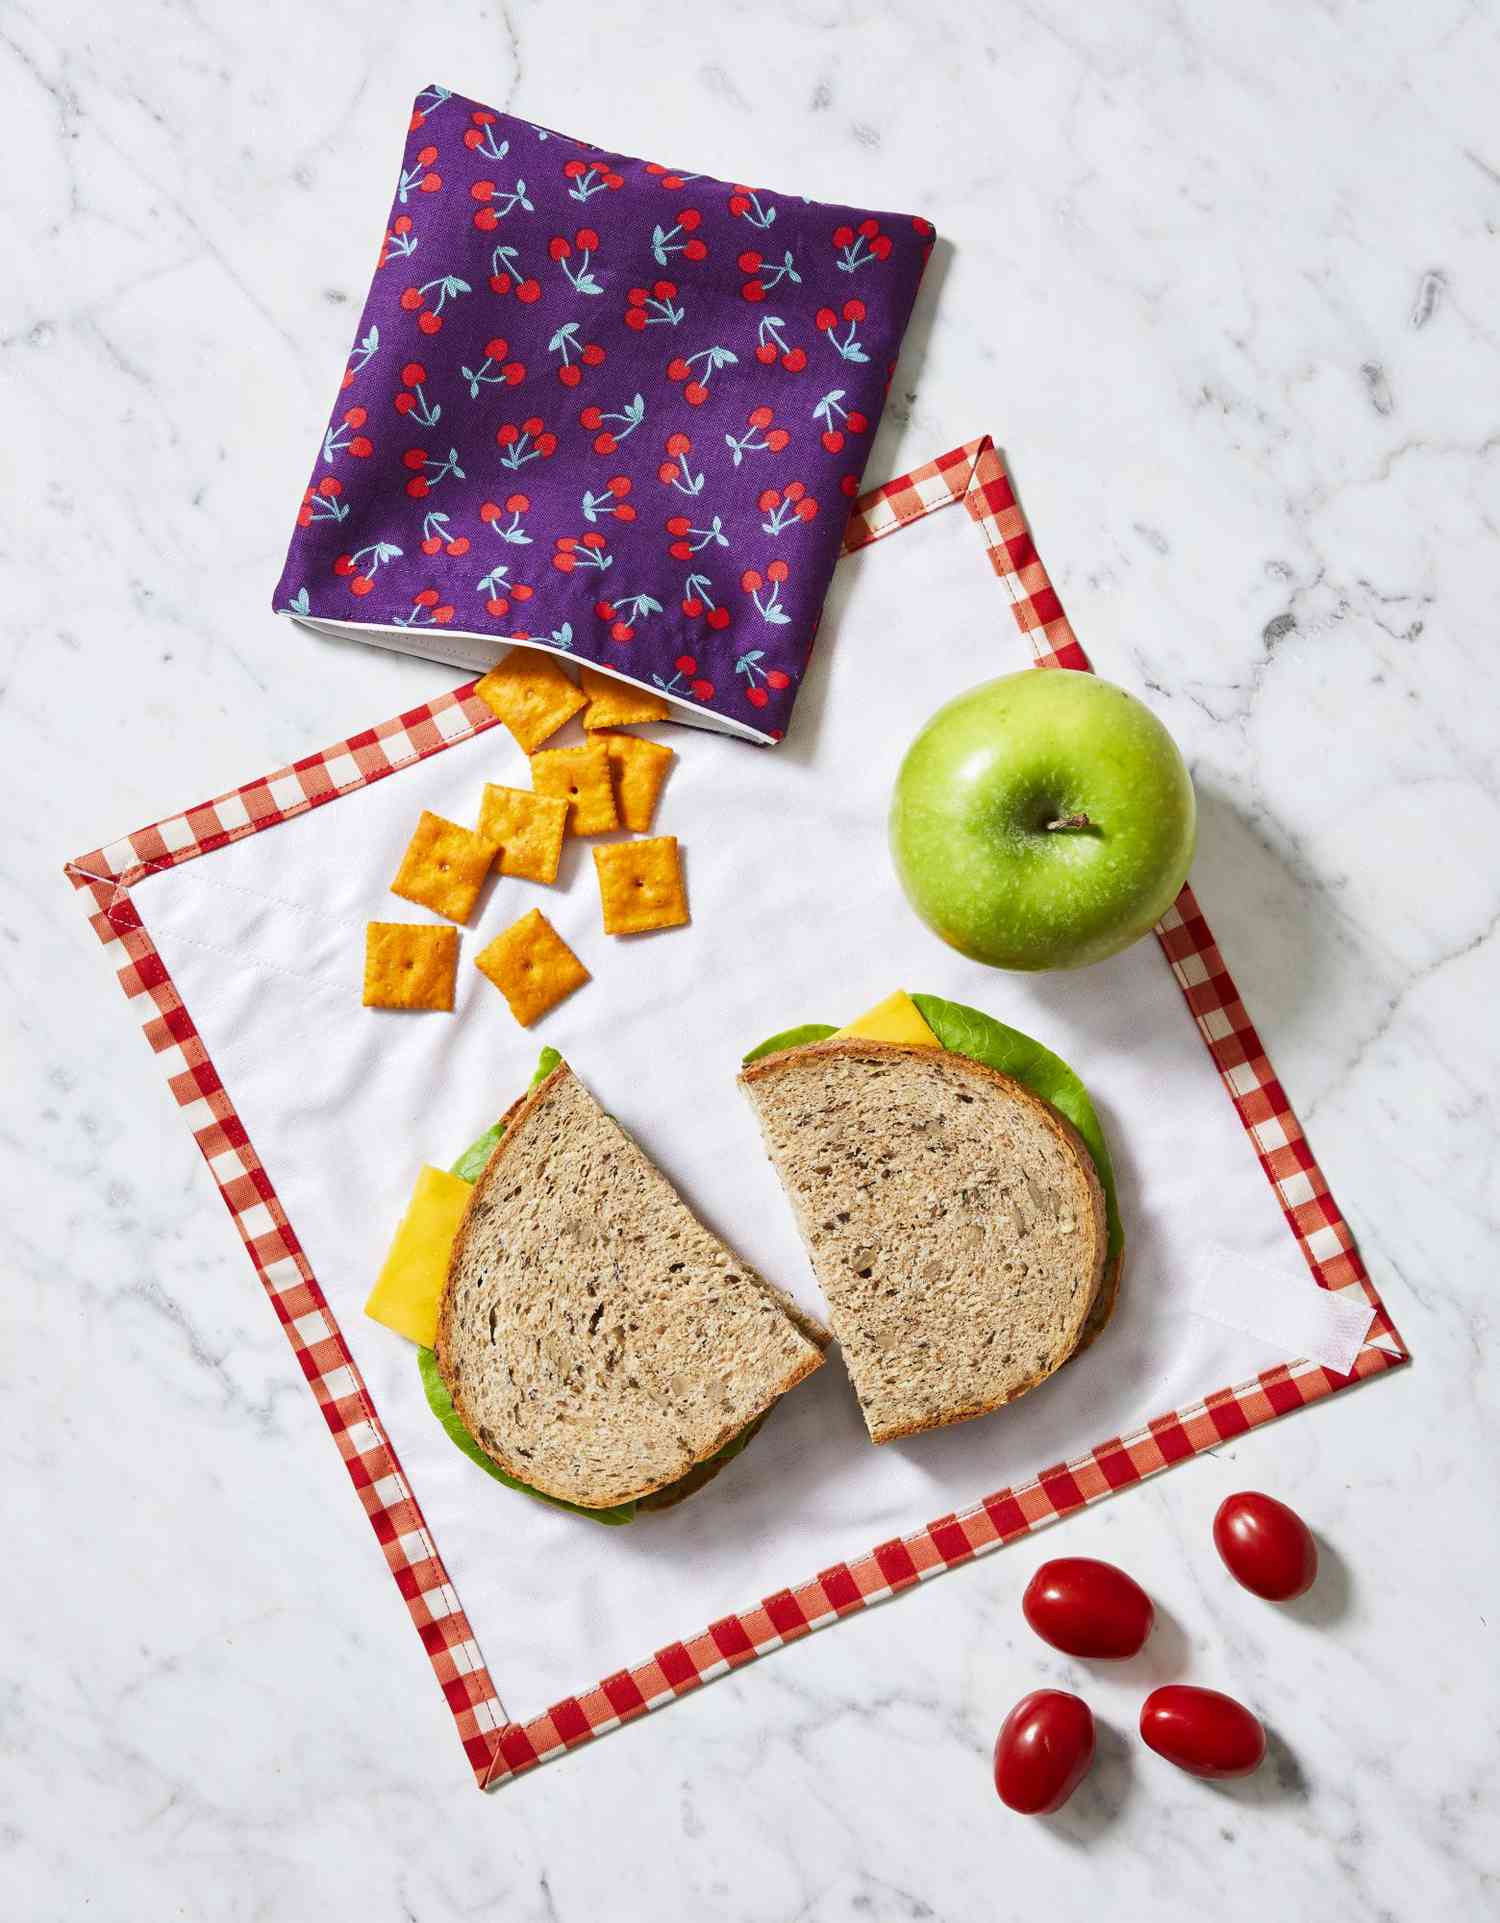 Reusable Sandwich Wrap and Snack Bags